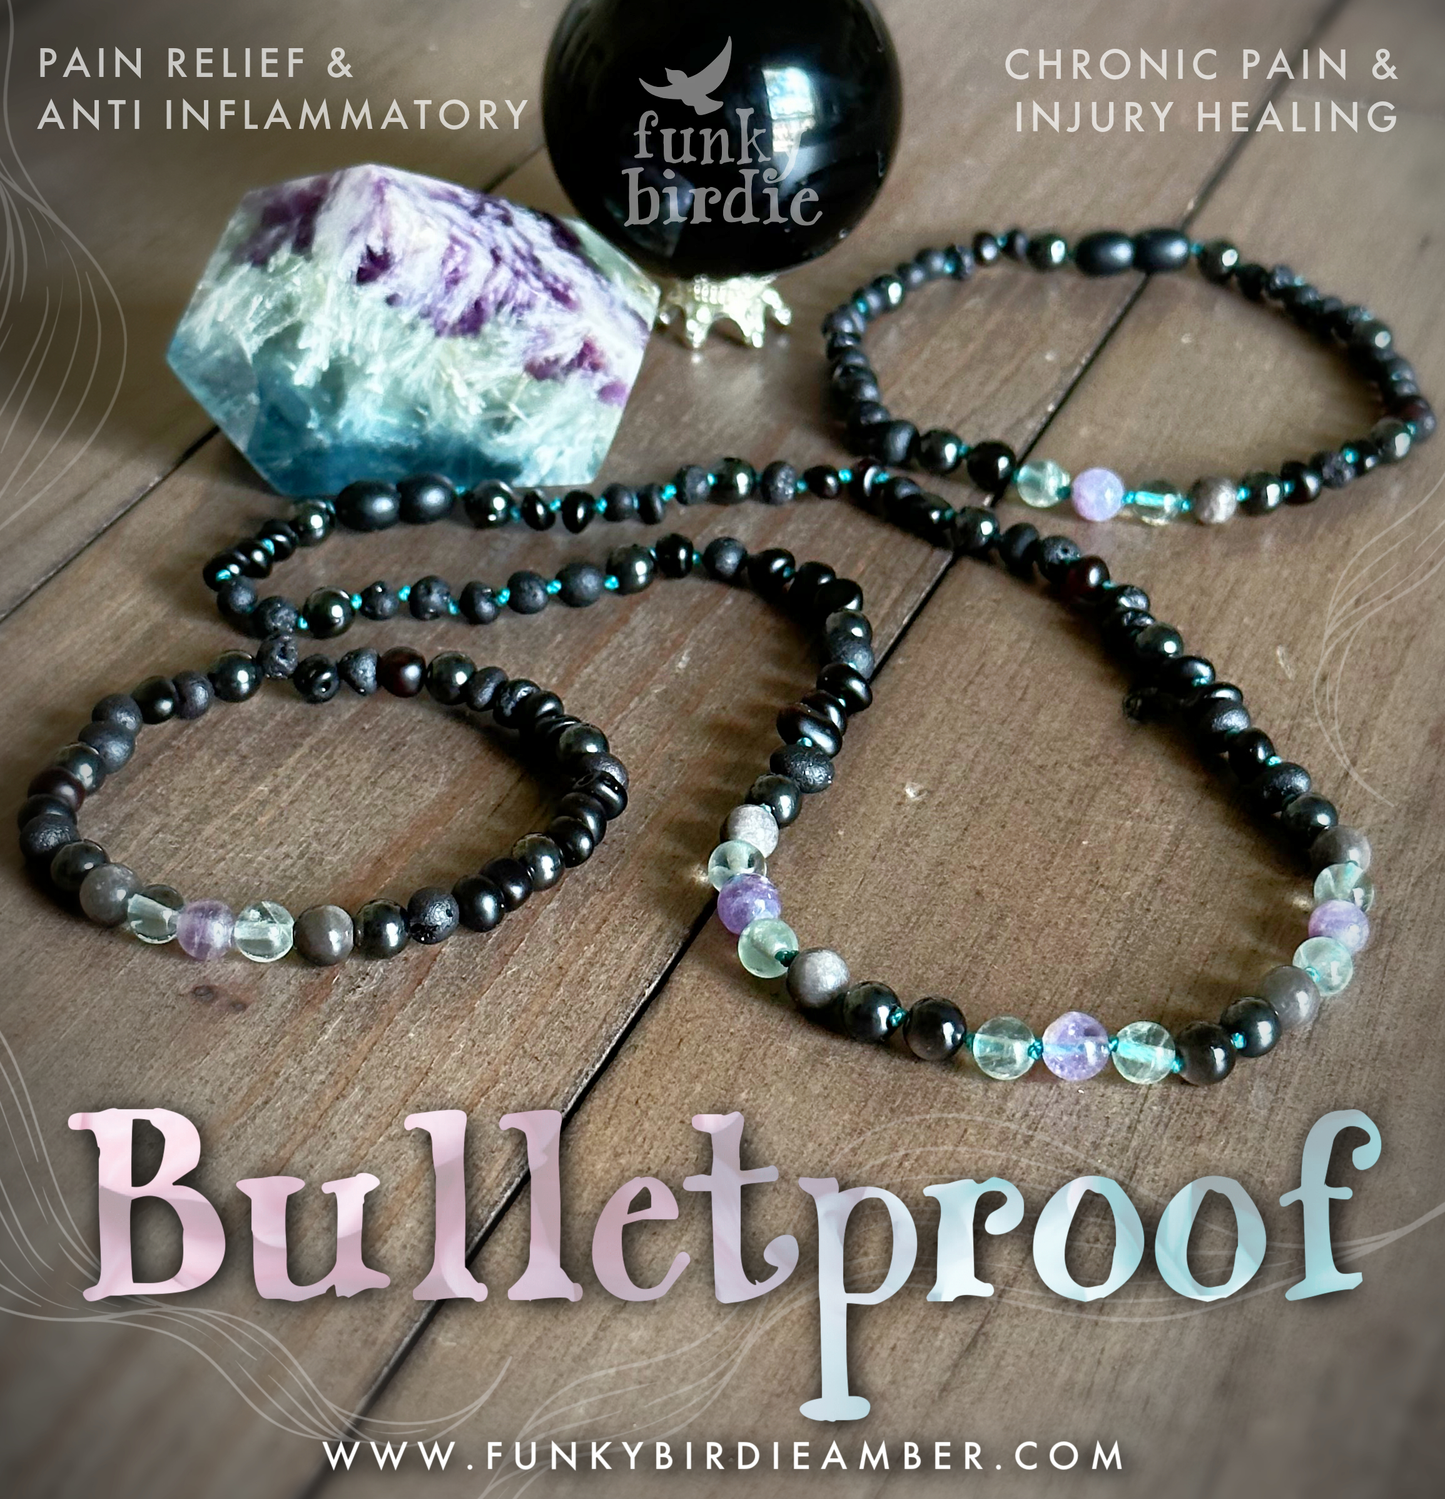 Bulletproof Necklace for Chronic Pain Relief